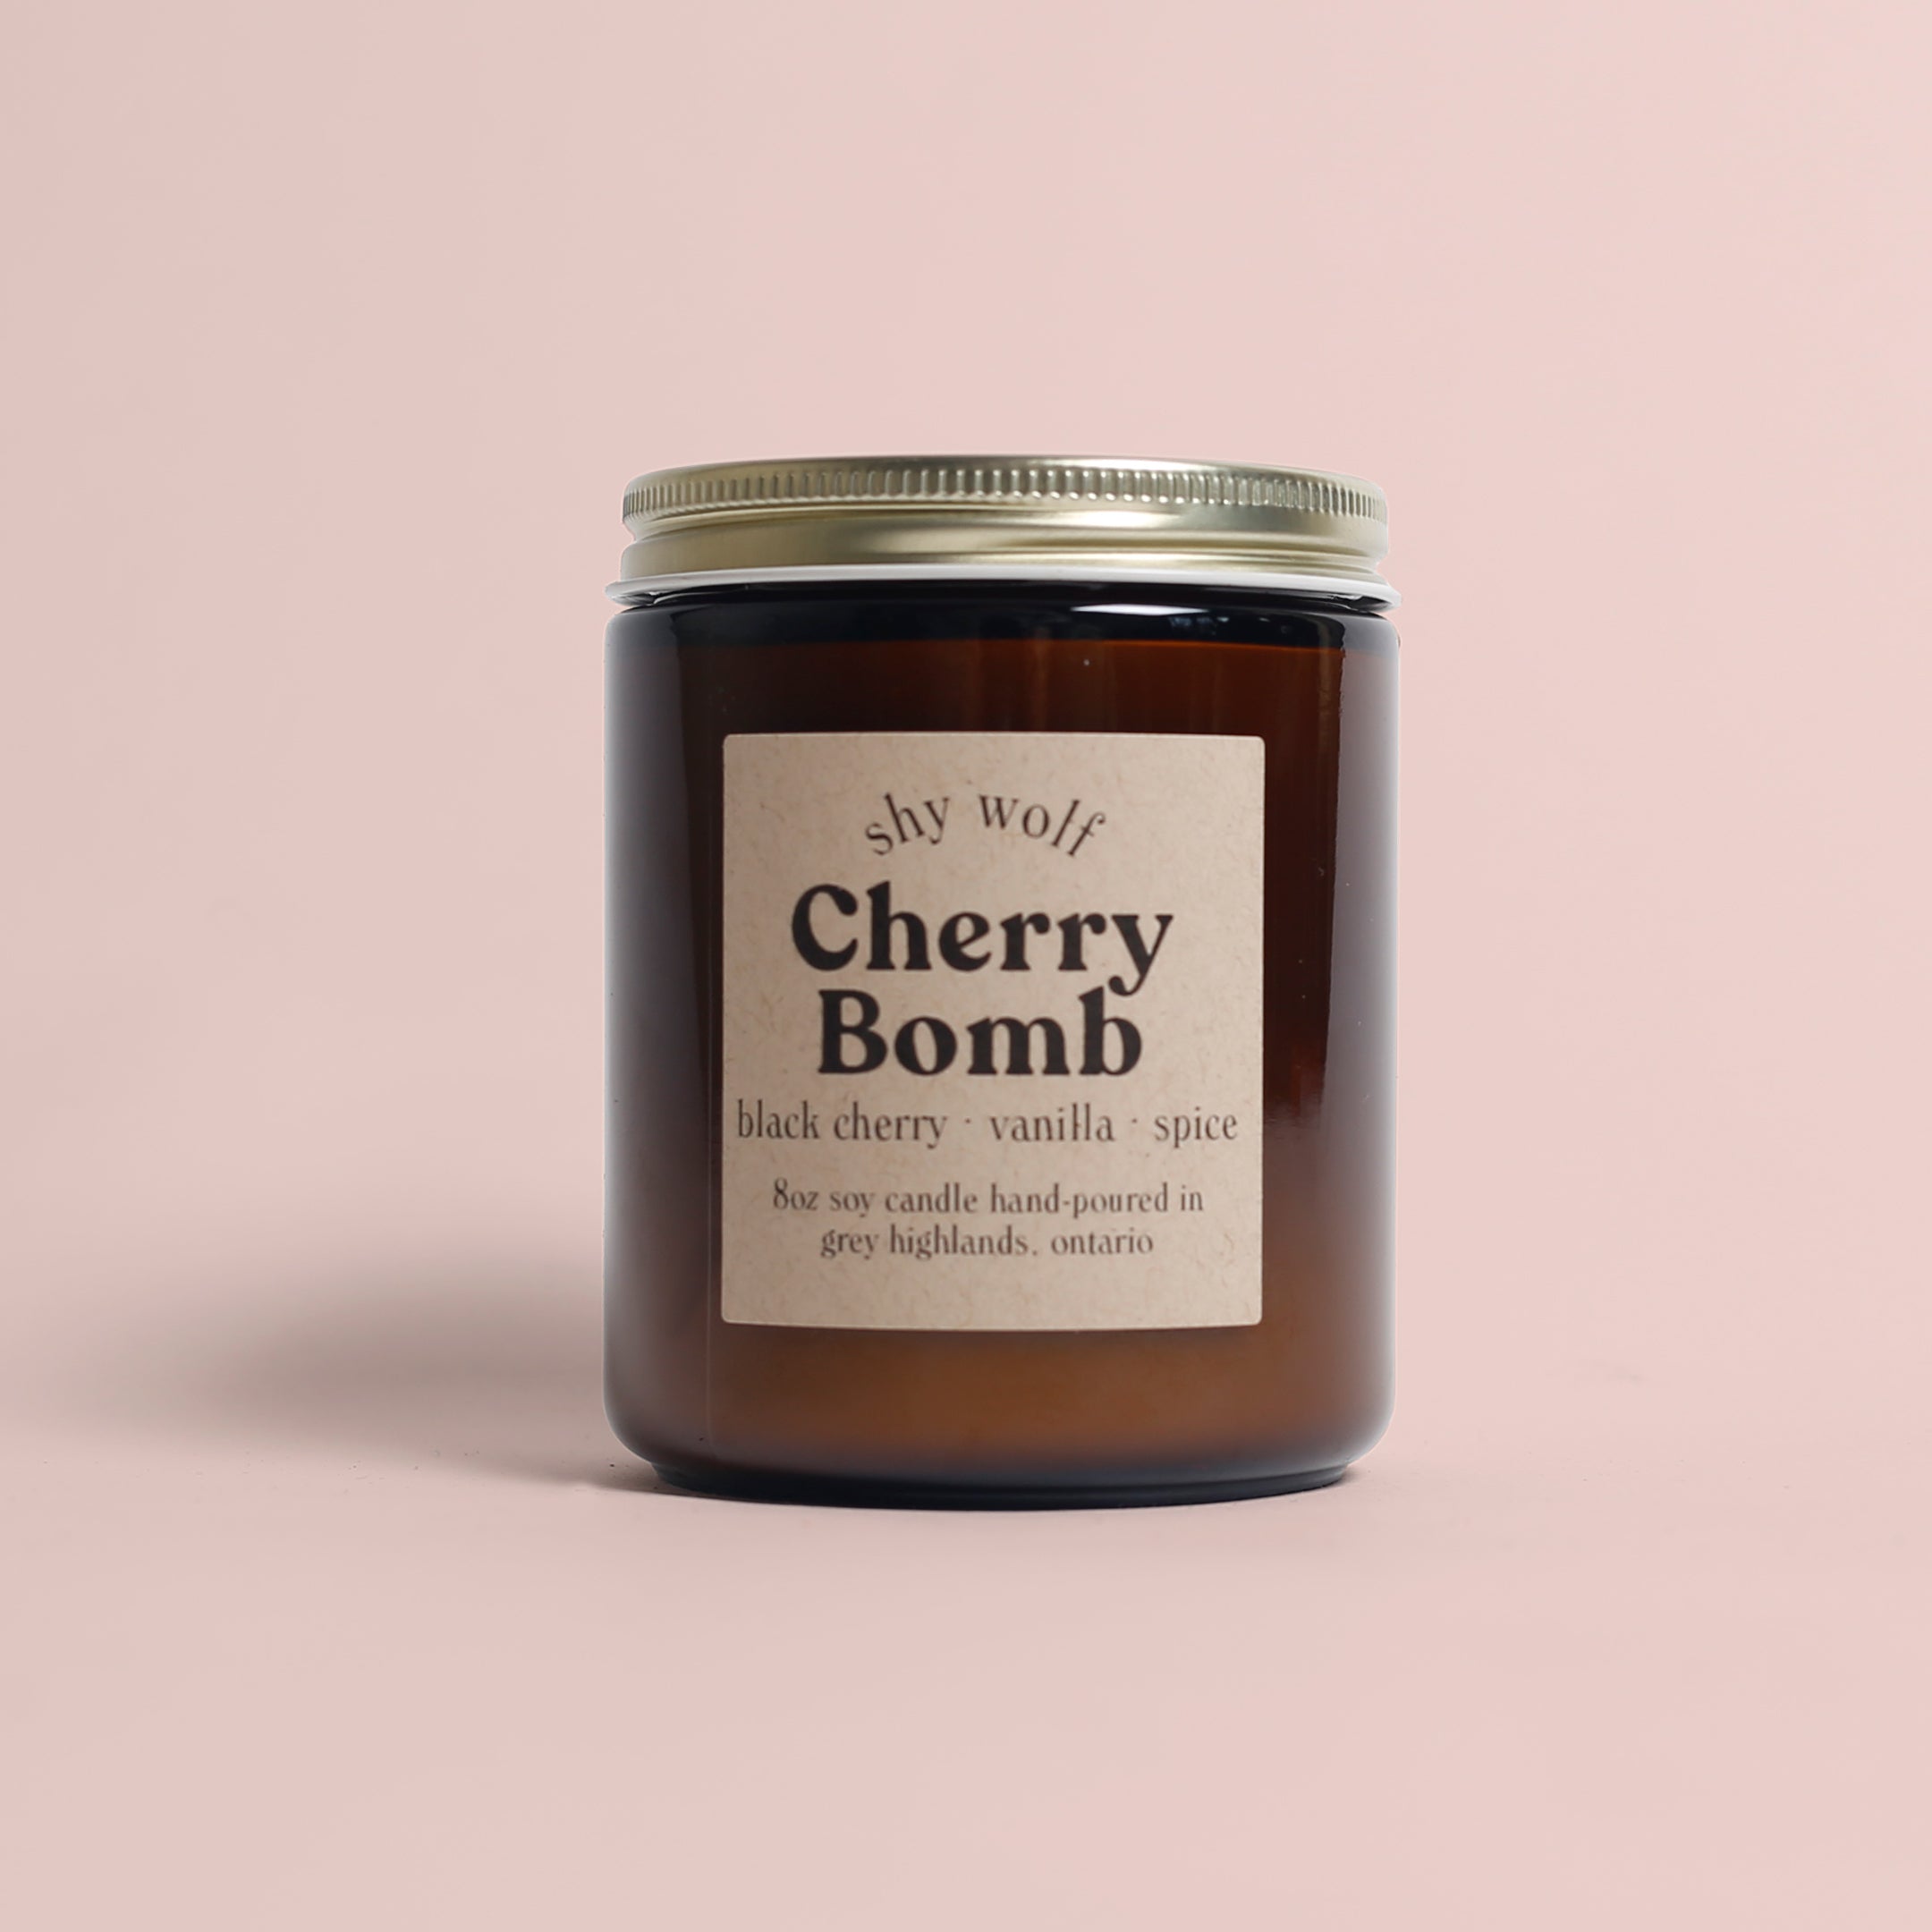 Shy Wolf Candles - Cherry Bomb